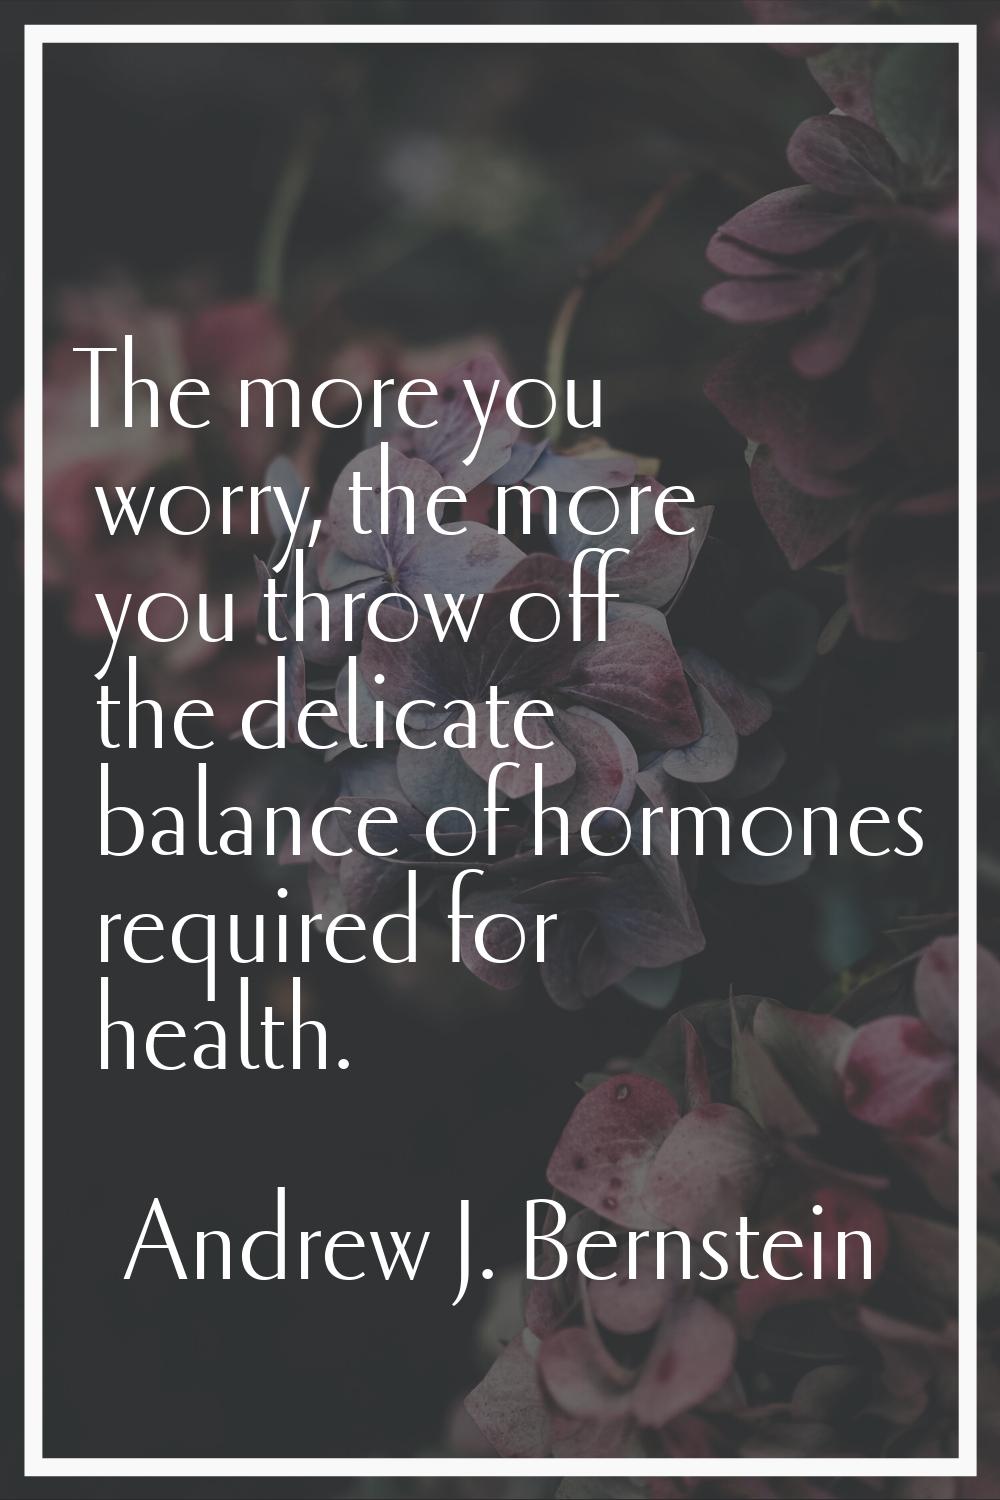 The more you worry, the more you throw off the delicate balance of hormones required for health.